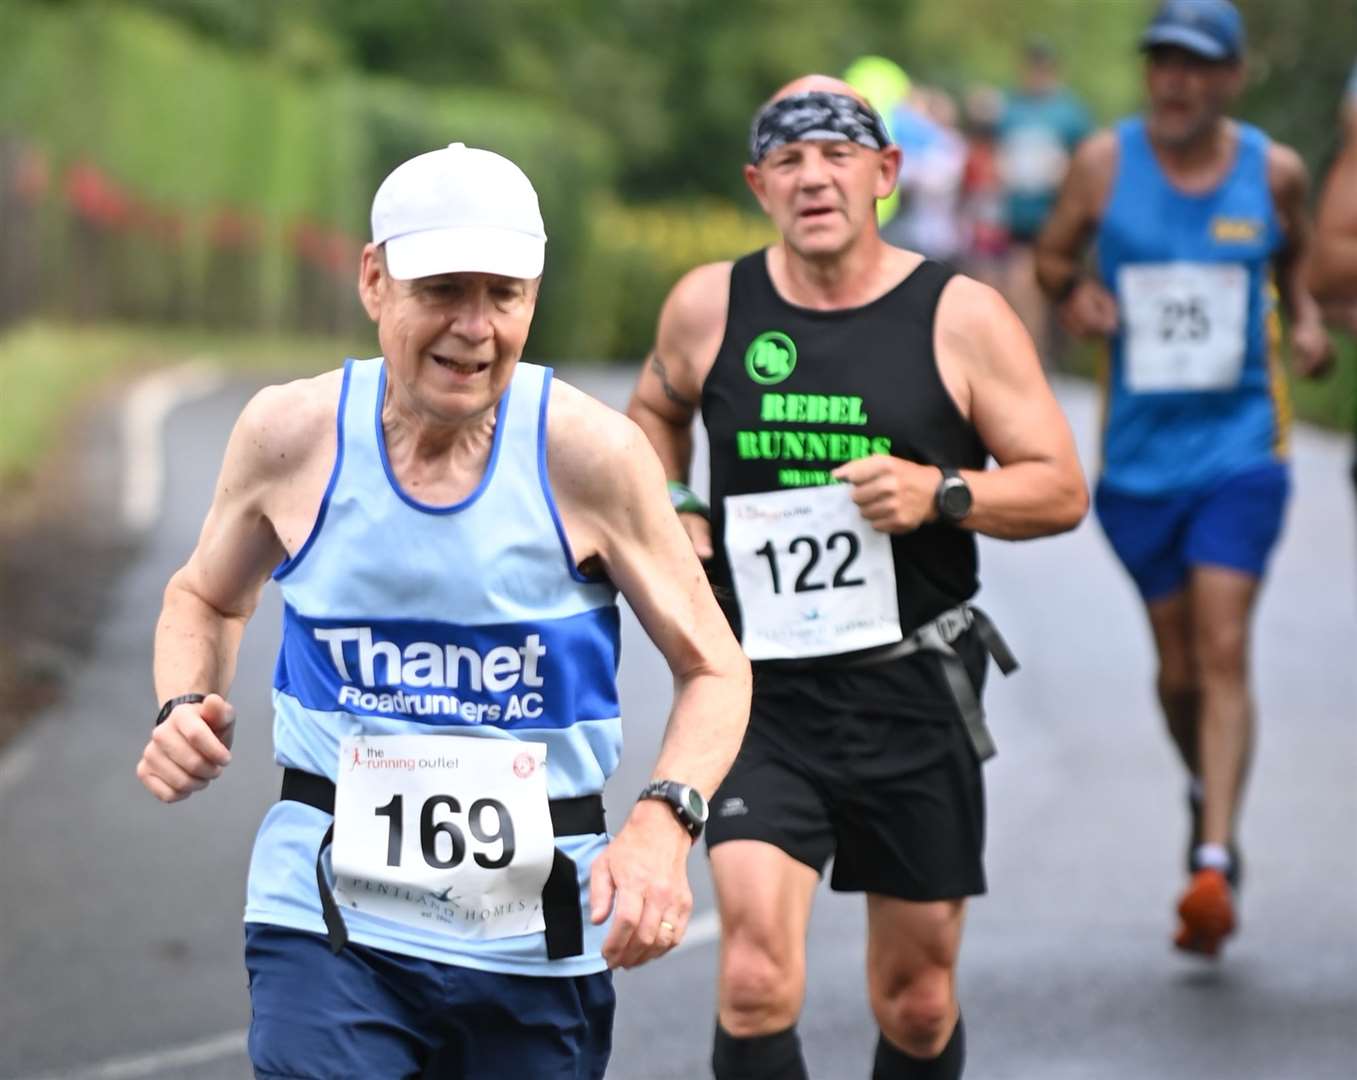 Mark James Hadden of Thanet Road Runners. Picture: Barry Goodwin (49790323)